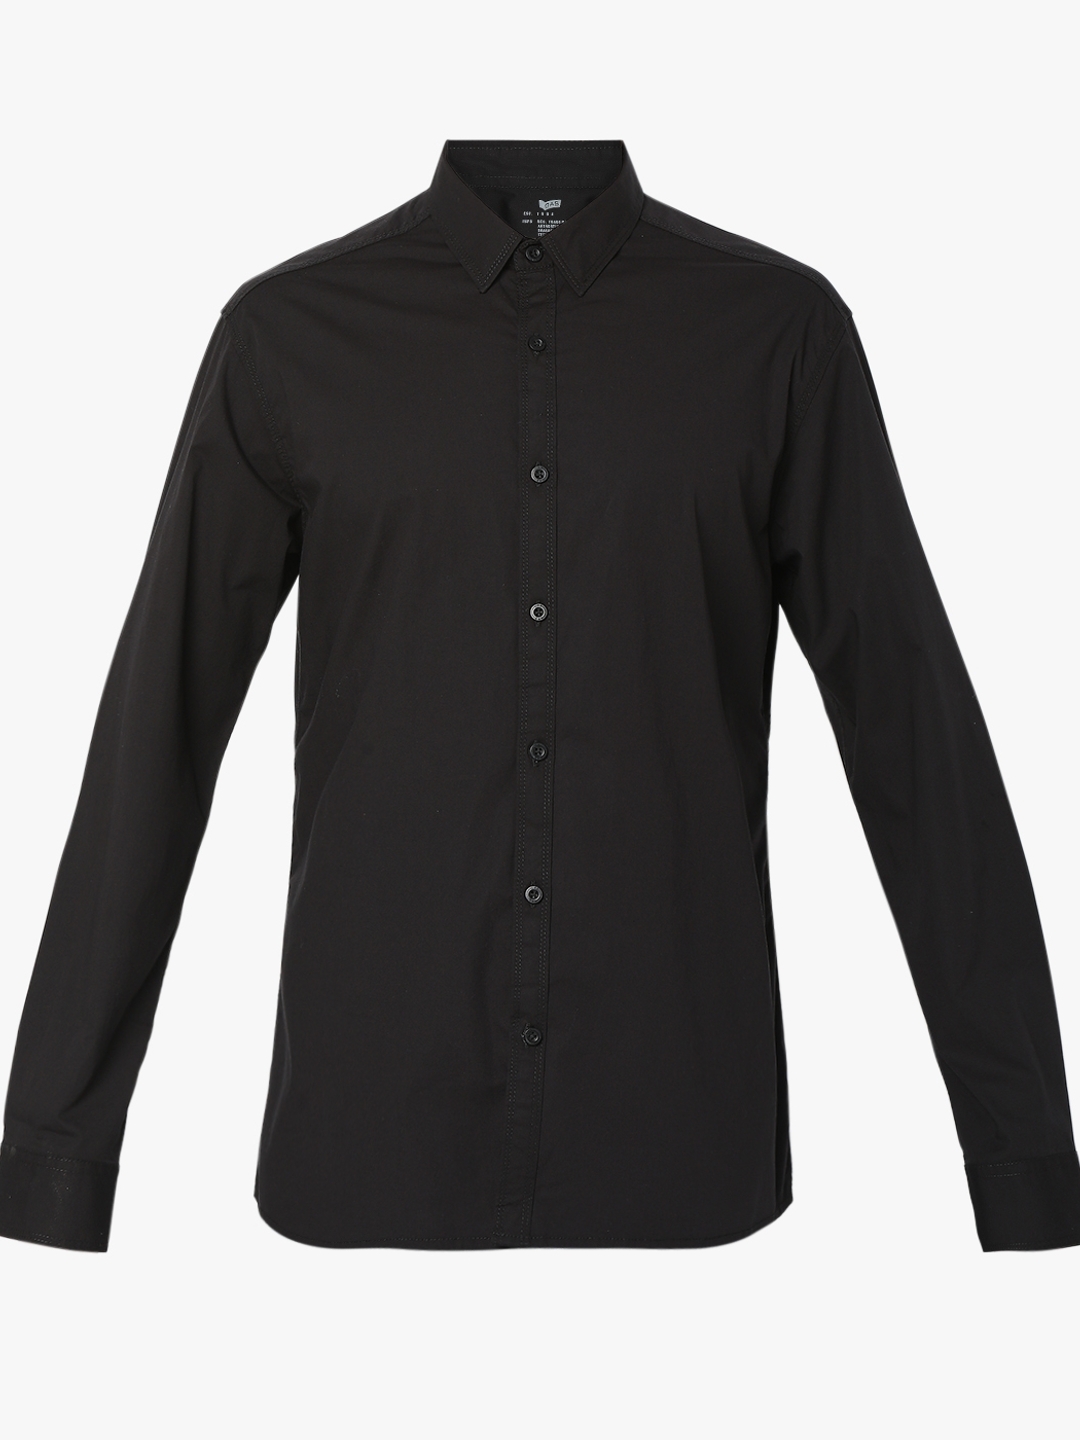 Andrew Mix Shirt with Spread Collar